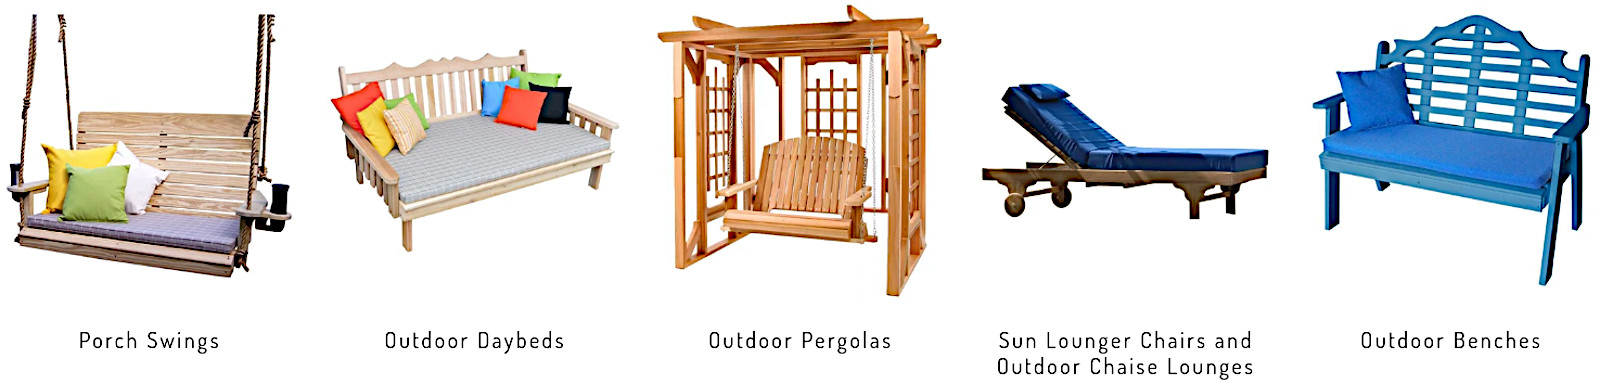 Popularly Priced outdoor furniture